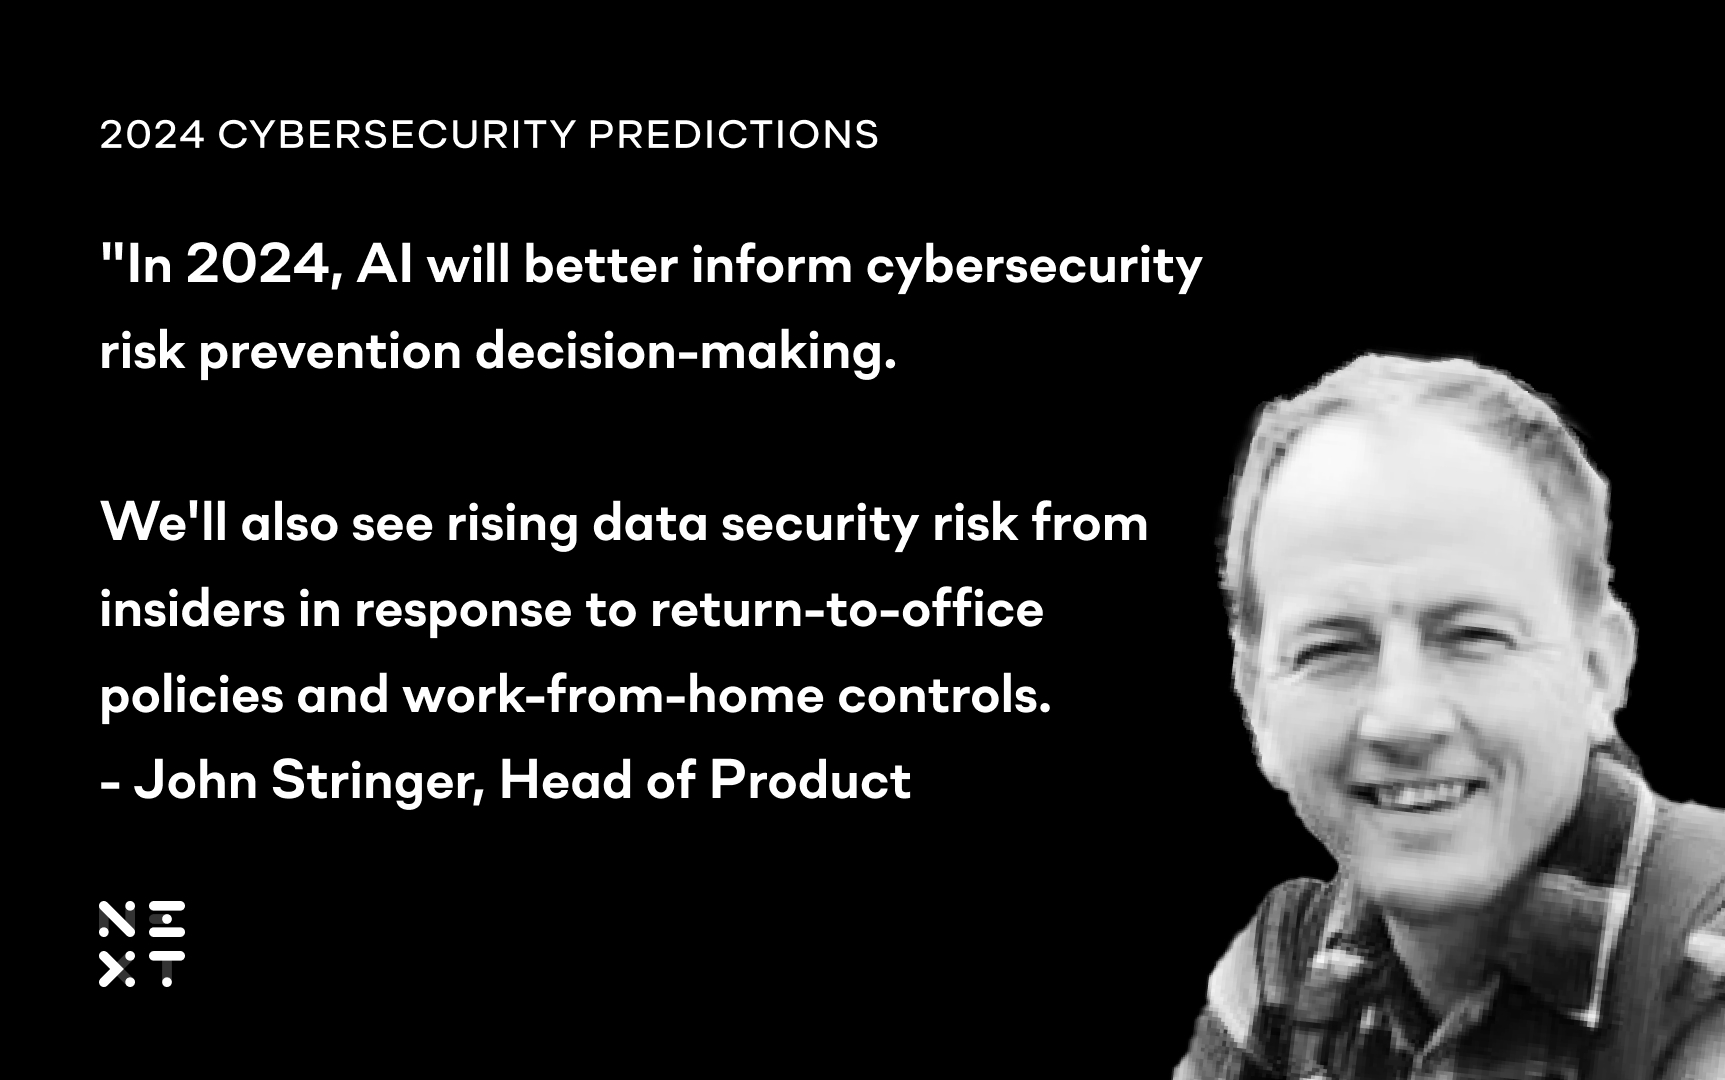 John Stringer predicts AI will support cybersecurity pros and a rise in insider risk